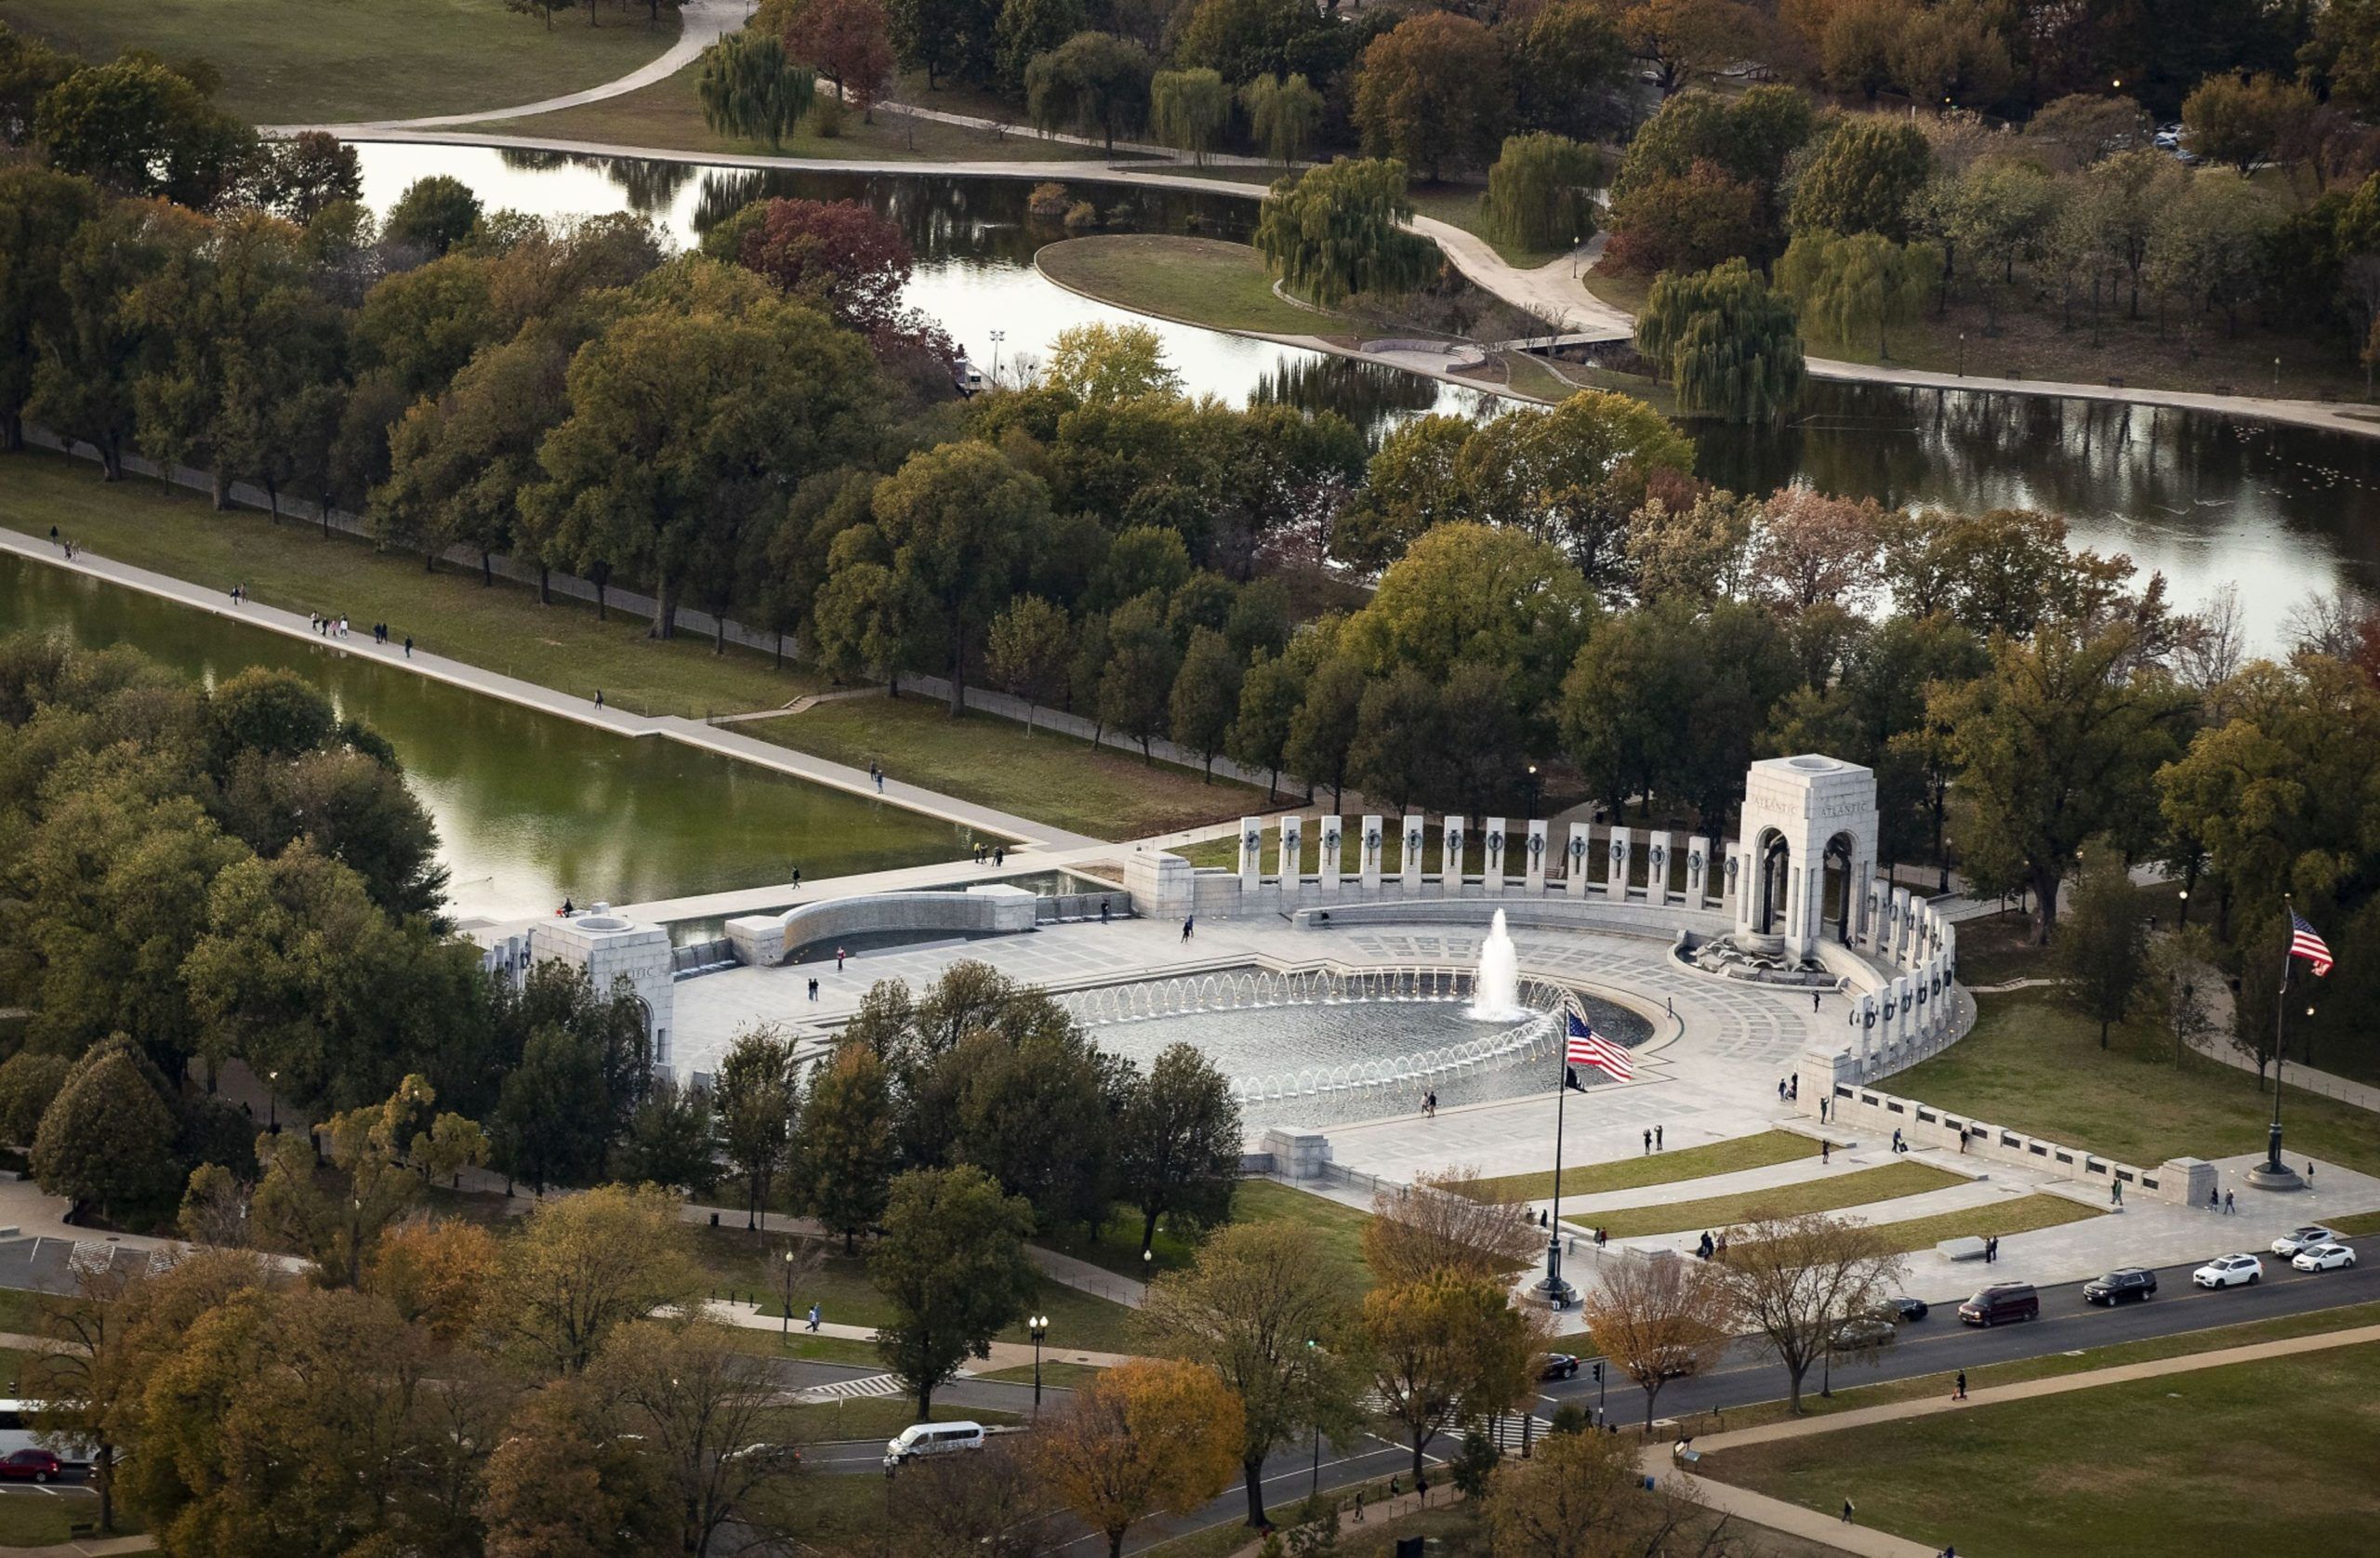 The World War II Memorial is seen in this aerial photograph taken above Washington, D.C., U.S., on Tuesday, Nov. 4, 2019. Democrats and Republicans are at odds over whether to provide new funding for Trump's signature border wall, as well as the duration of a stopgap measure. Some lawmakers proposed delaying spending decisions by a few weeks, while others advocated for a funding bill to last though February or March. Photographer: Al Drago/Bloomberg